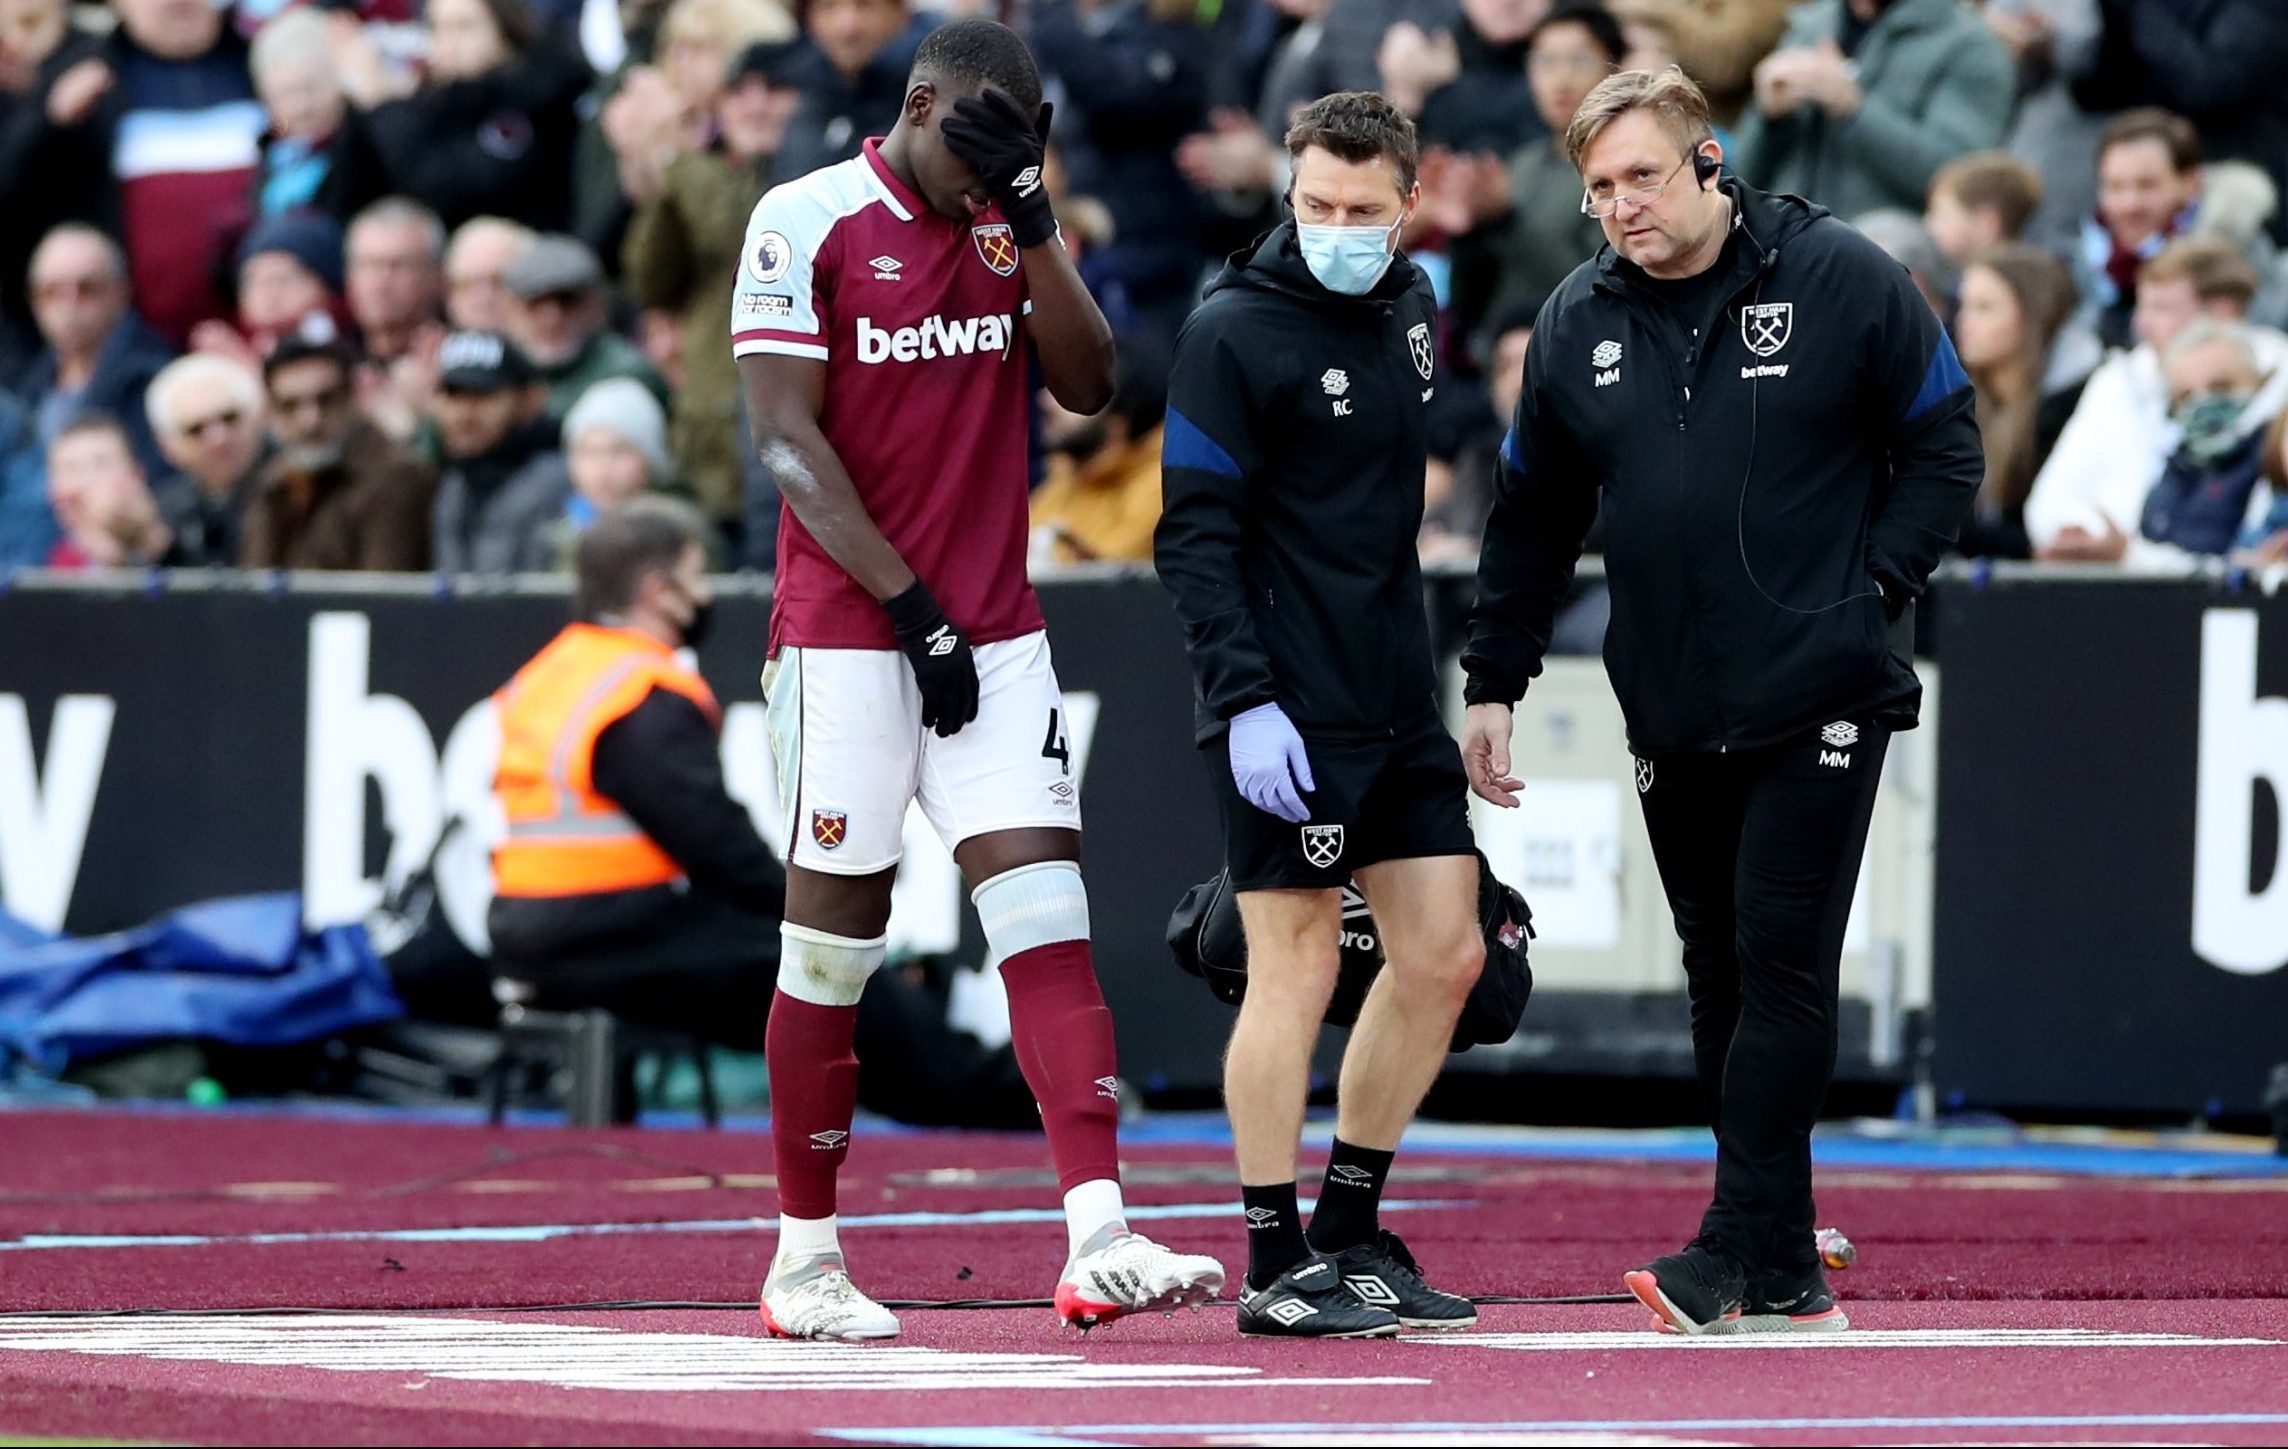 West Ham's Kurt Zouma is gutted as he is substituted following injury against Chelsea